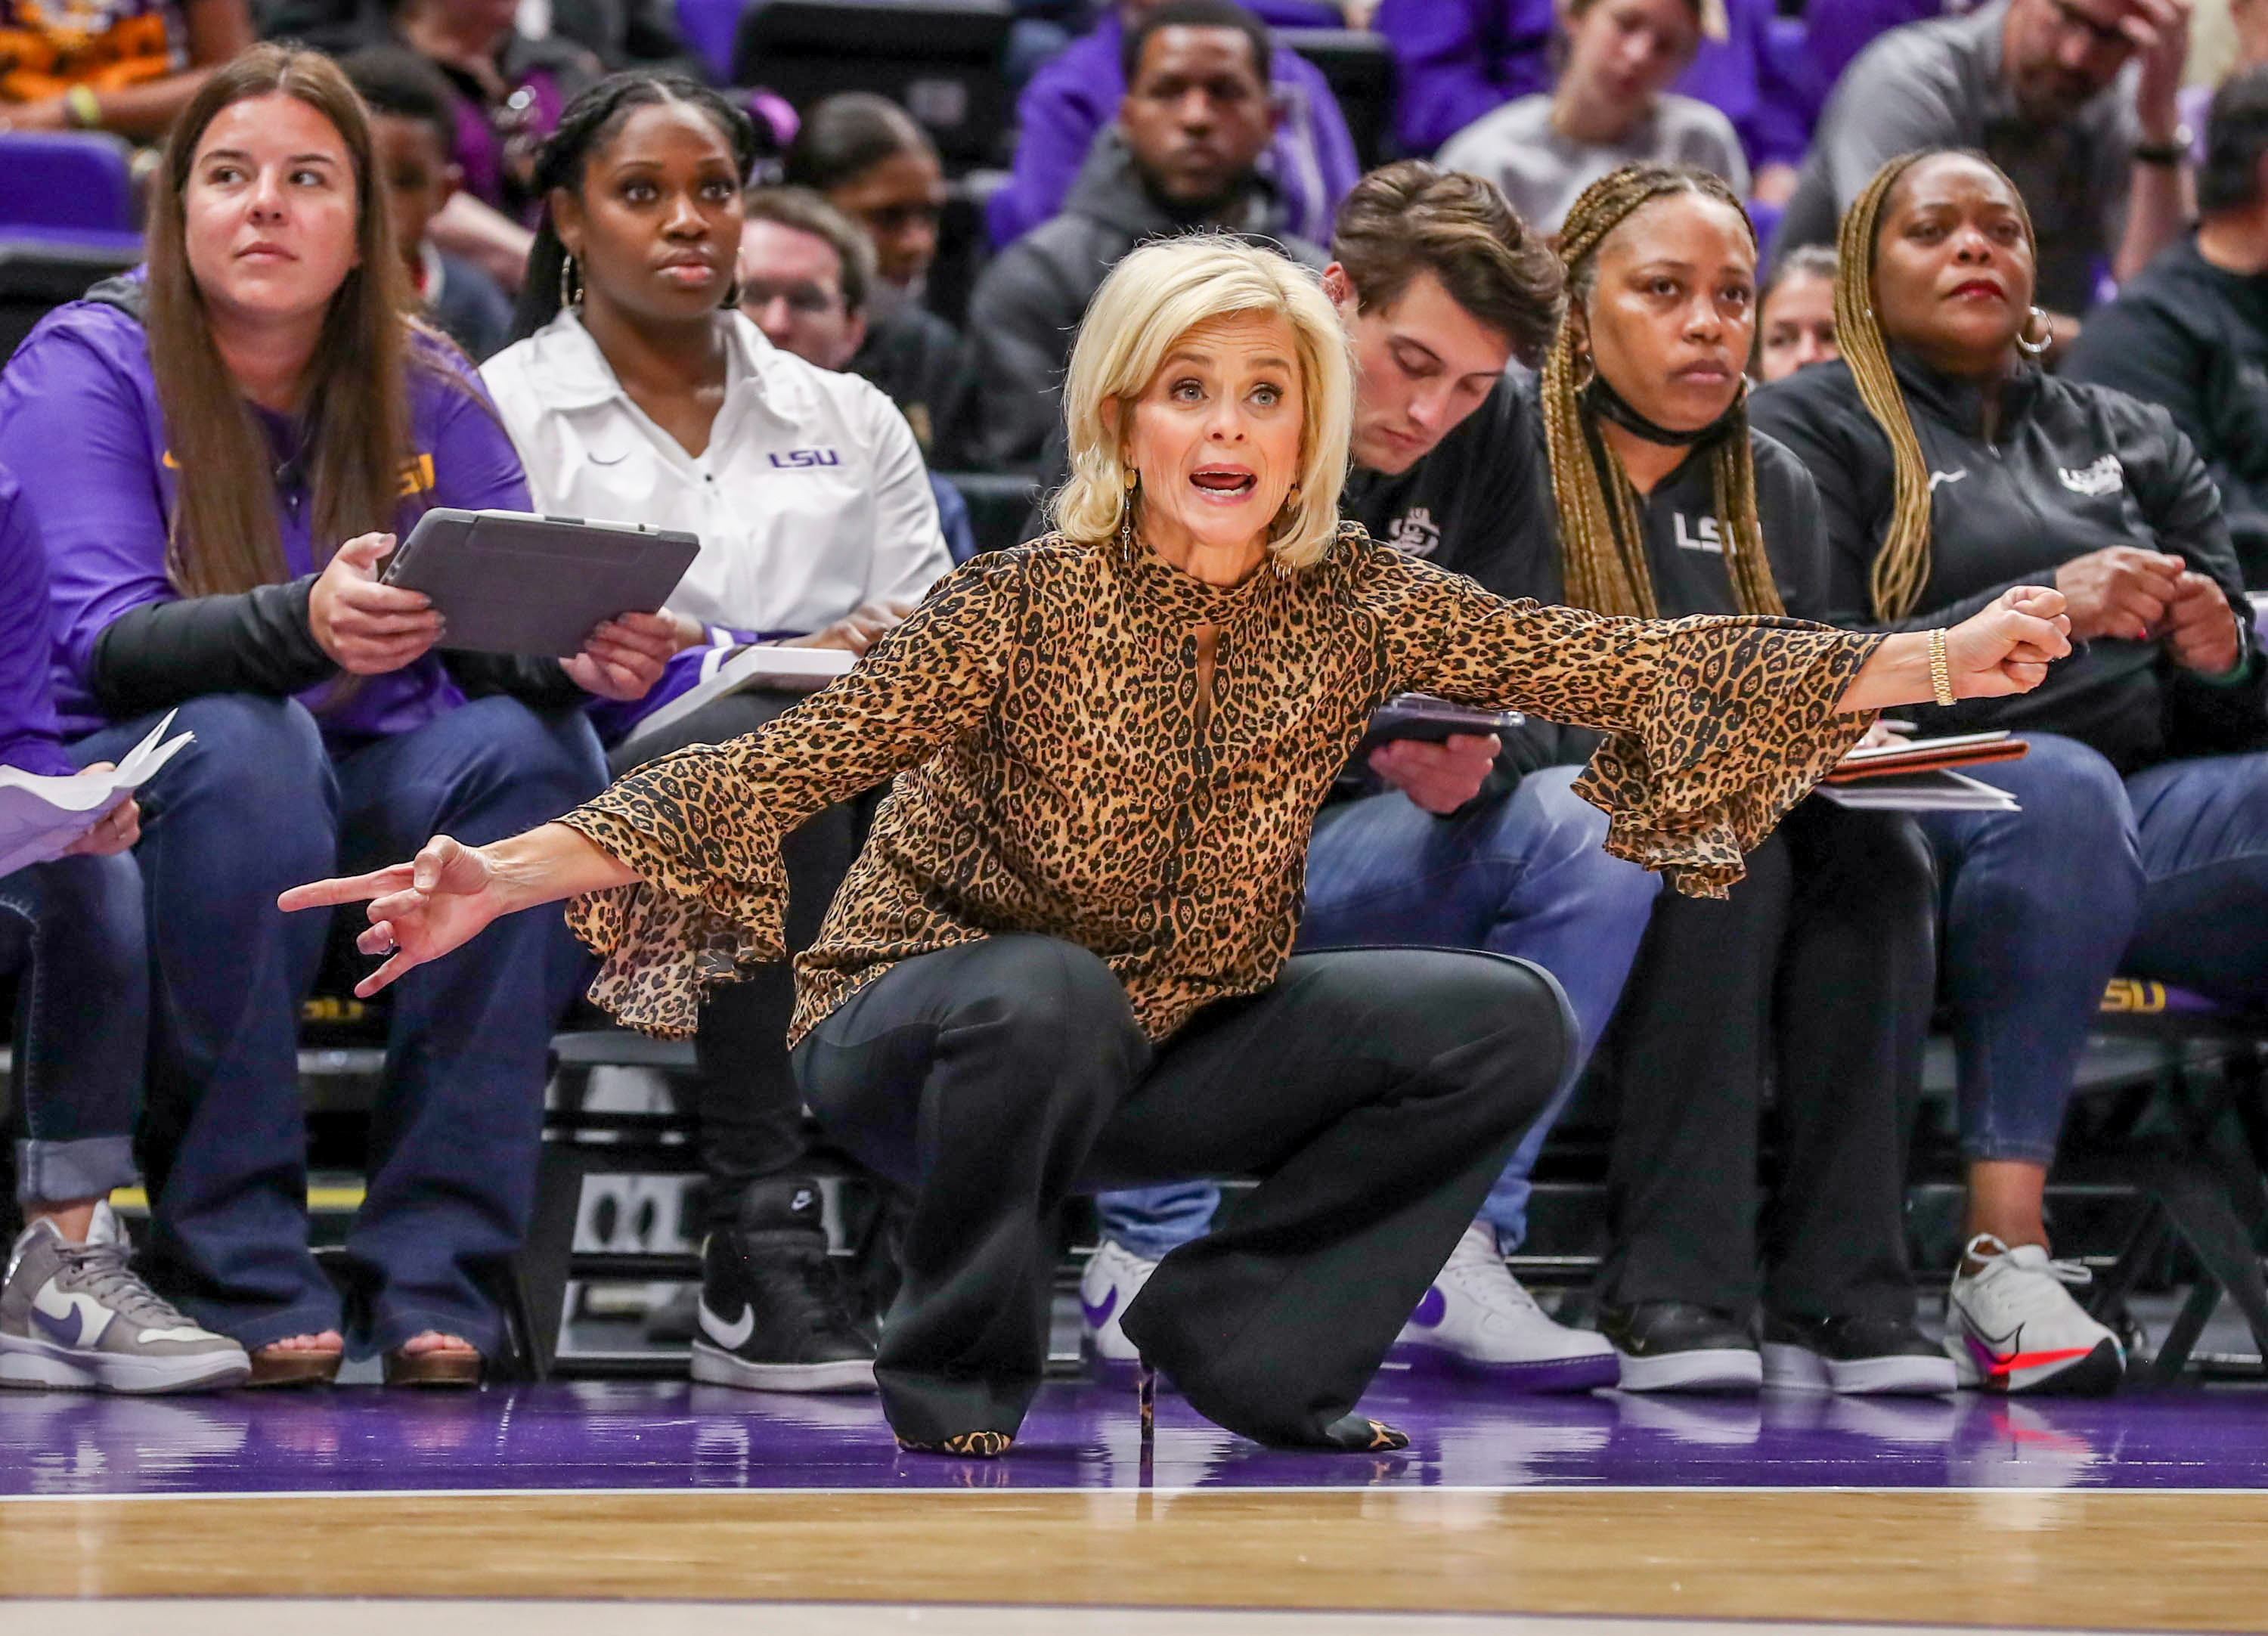 Mulkey hopes to lead LSU to its first national championship in the program's history. 